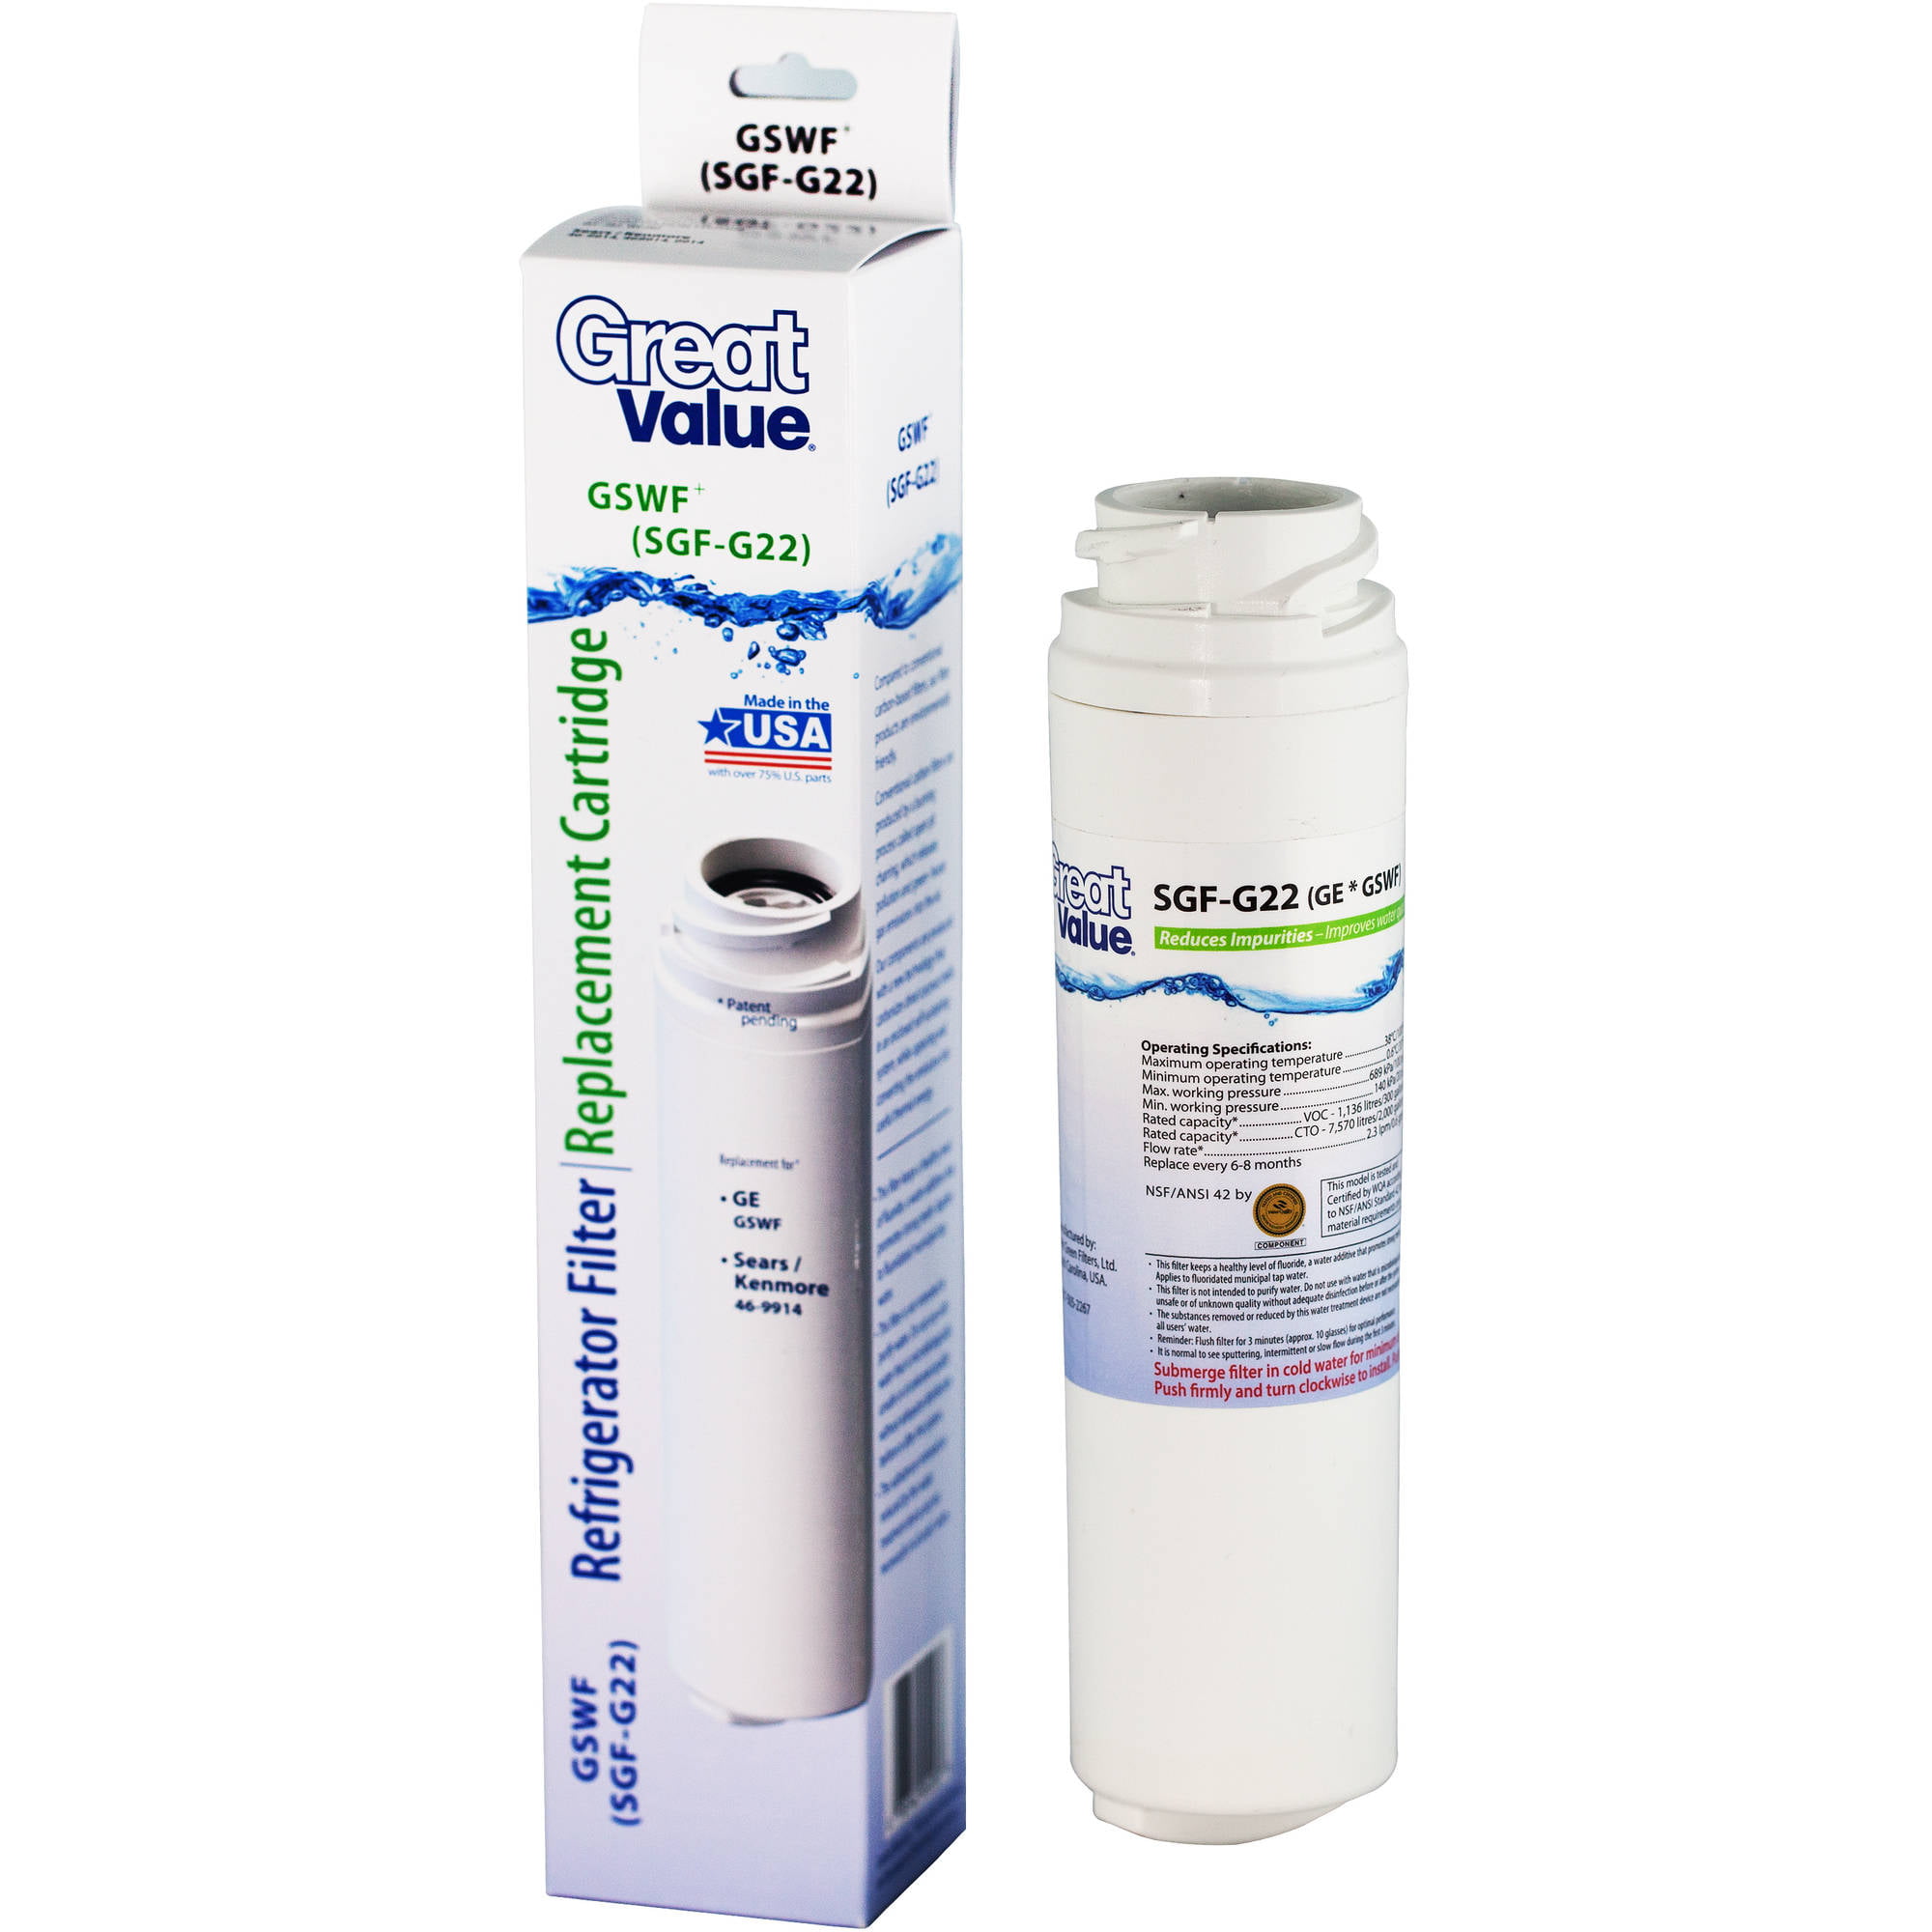 SGF-MSWF Replacement water filter for GE MSWF, MSWF3PK, MSWFDS,EFF ...